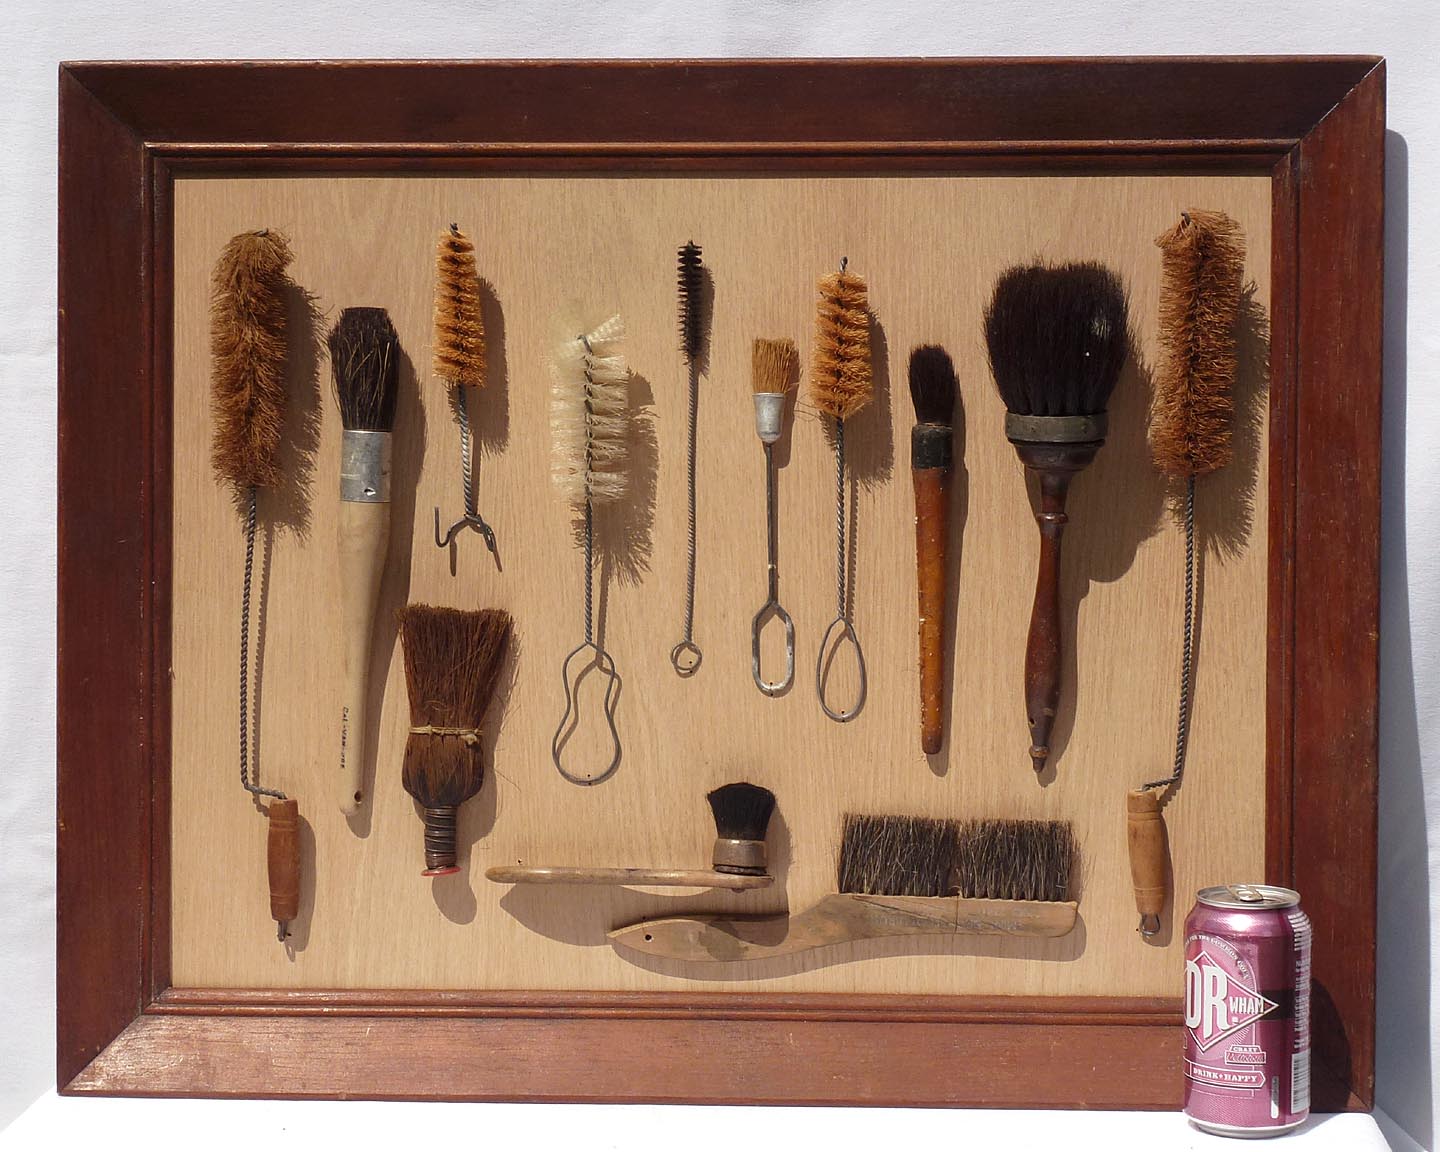 Framed collection of brushes